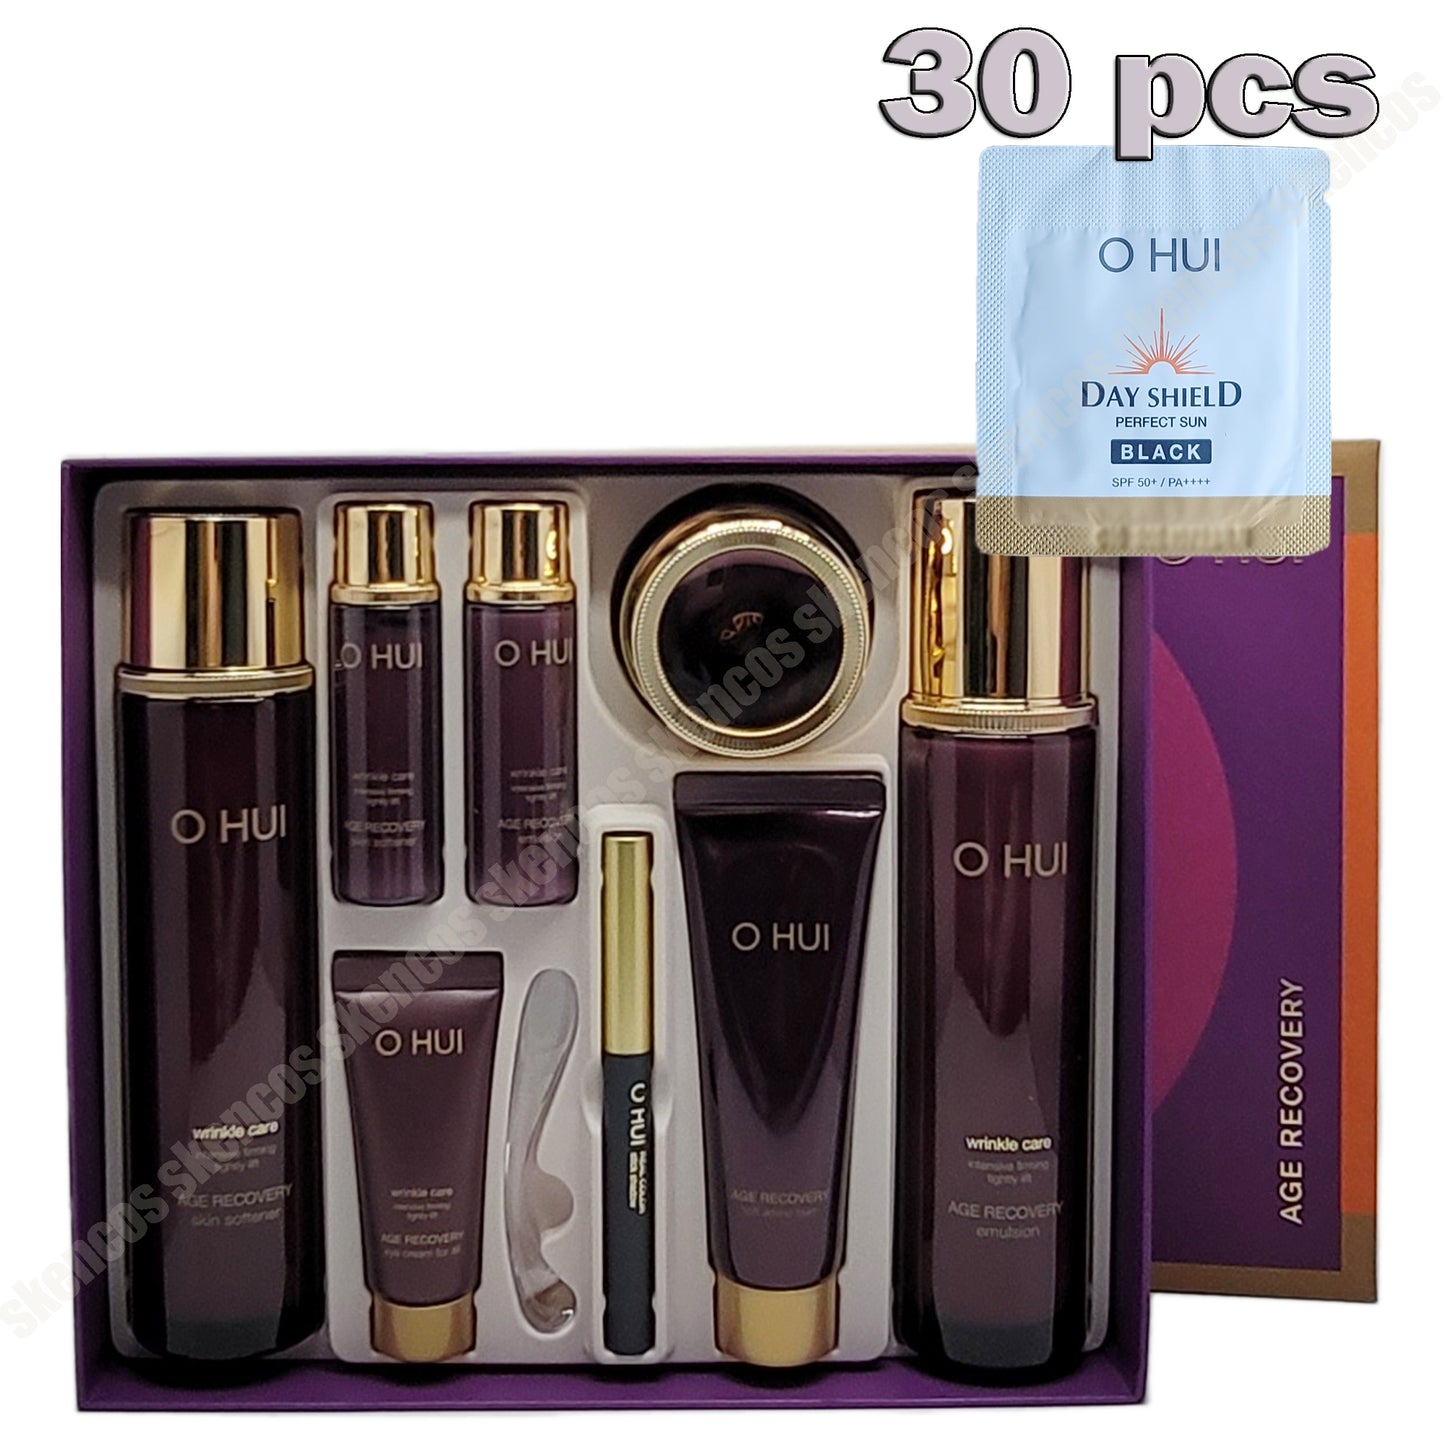 OHUI Age Recovery 4 items Special Set/Anti-aging/Renewed/Kits/Gift – SK ENC